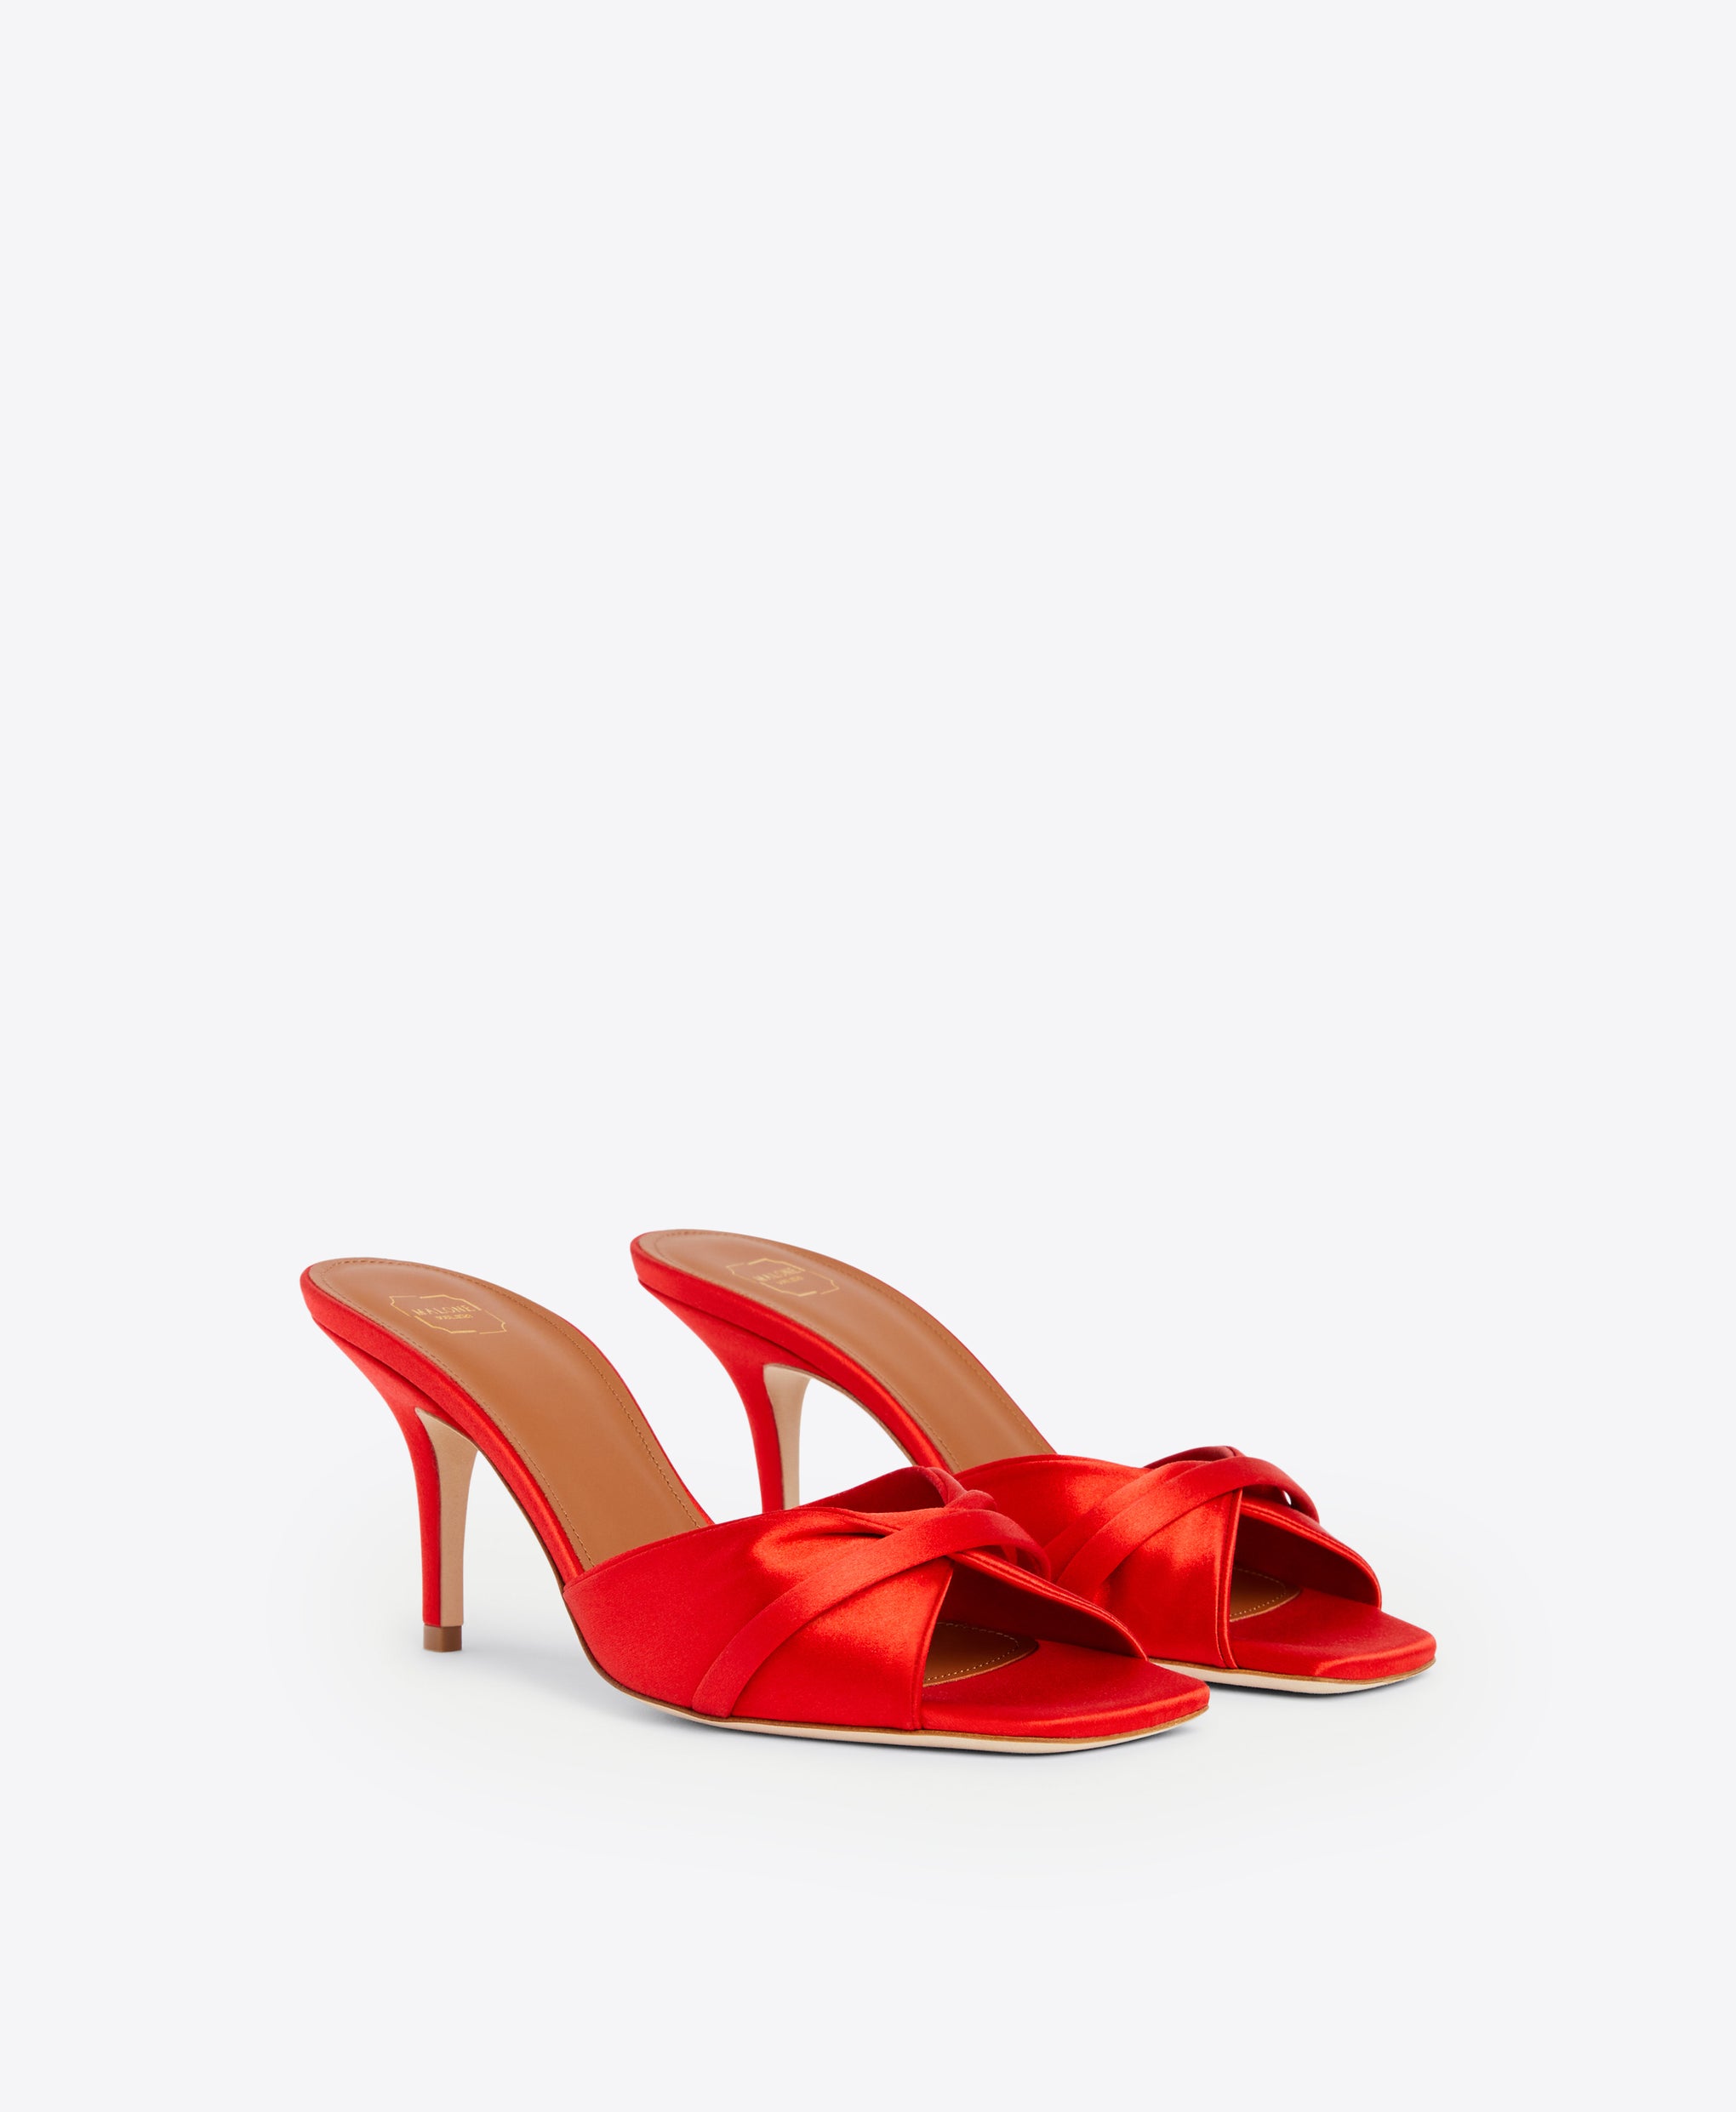 Malone Souliers Perla 70mm Red Satin Heeled Sandals